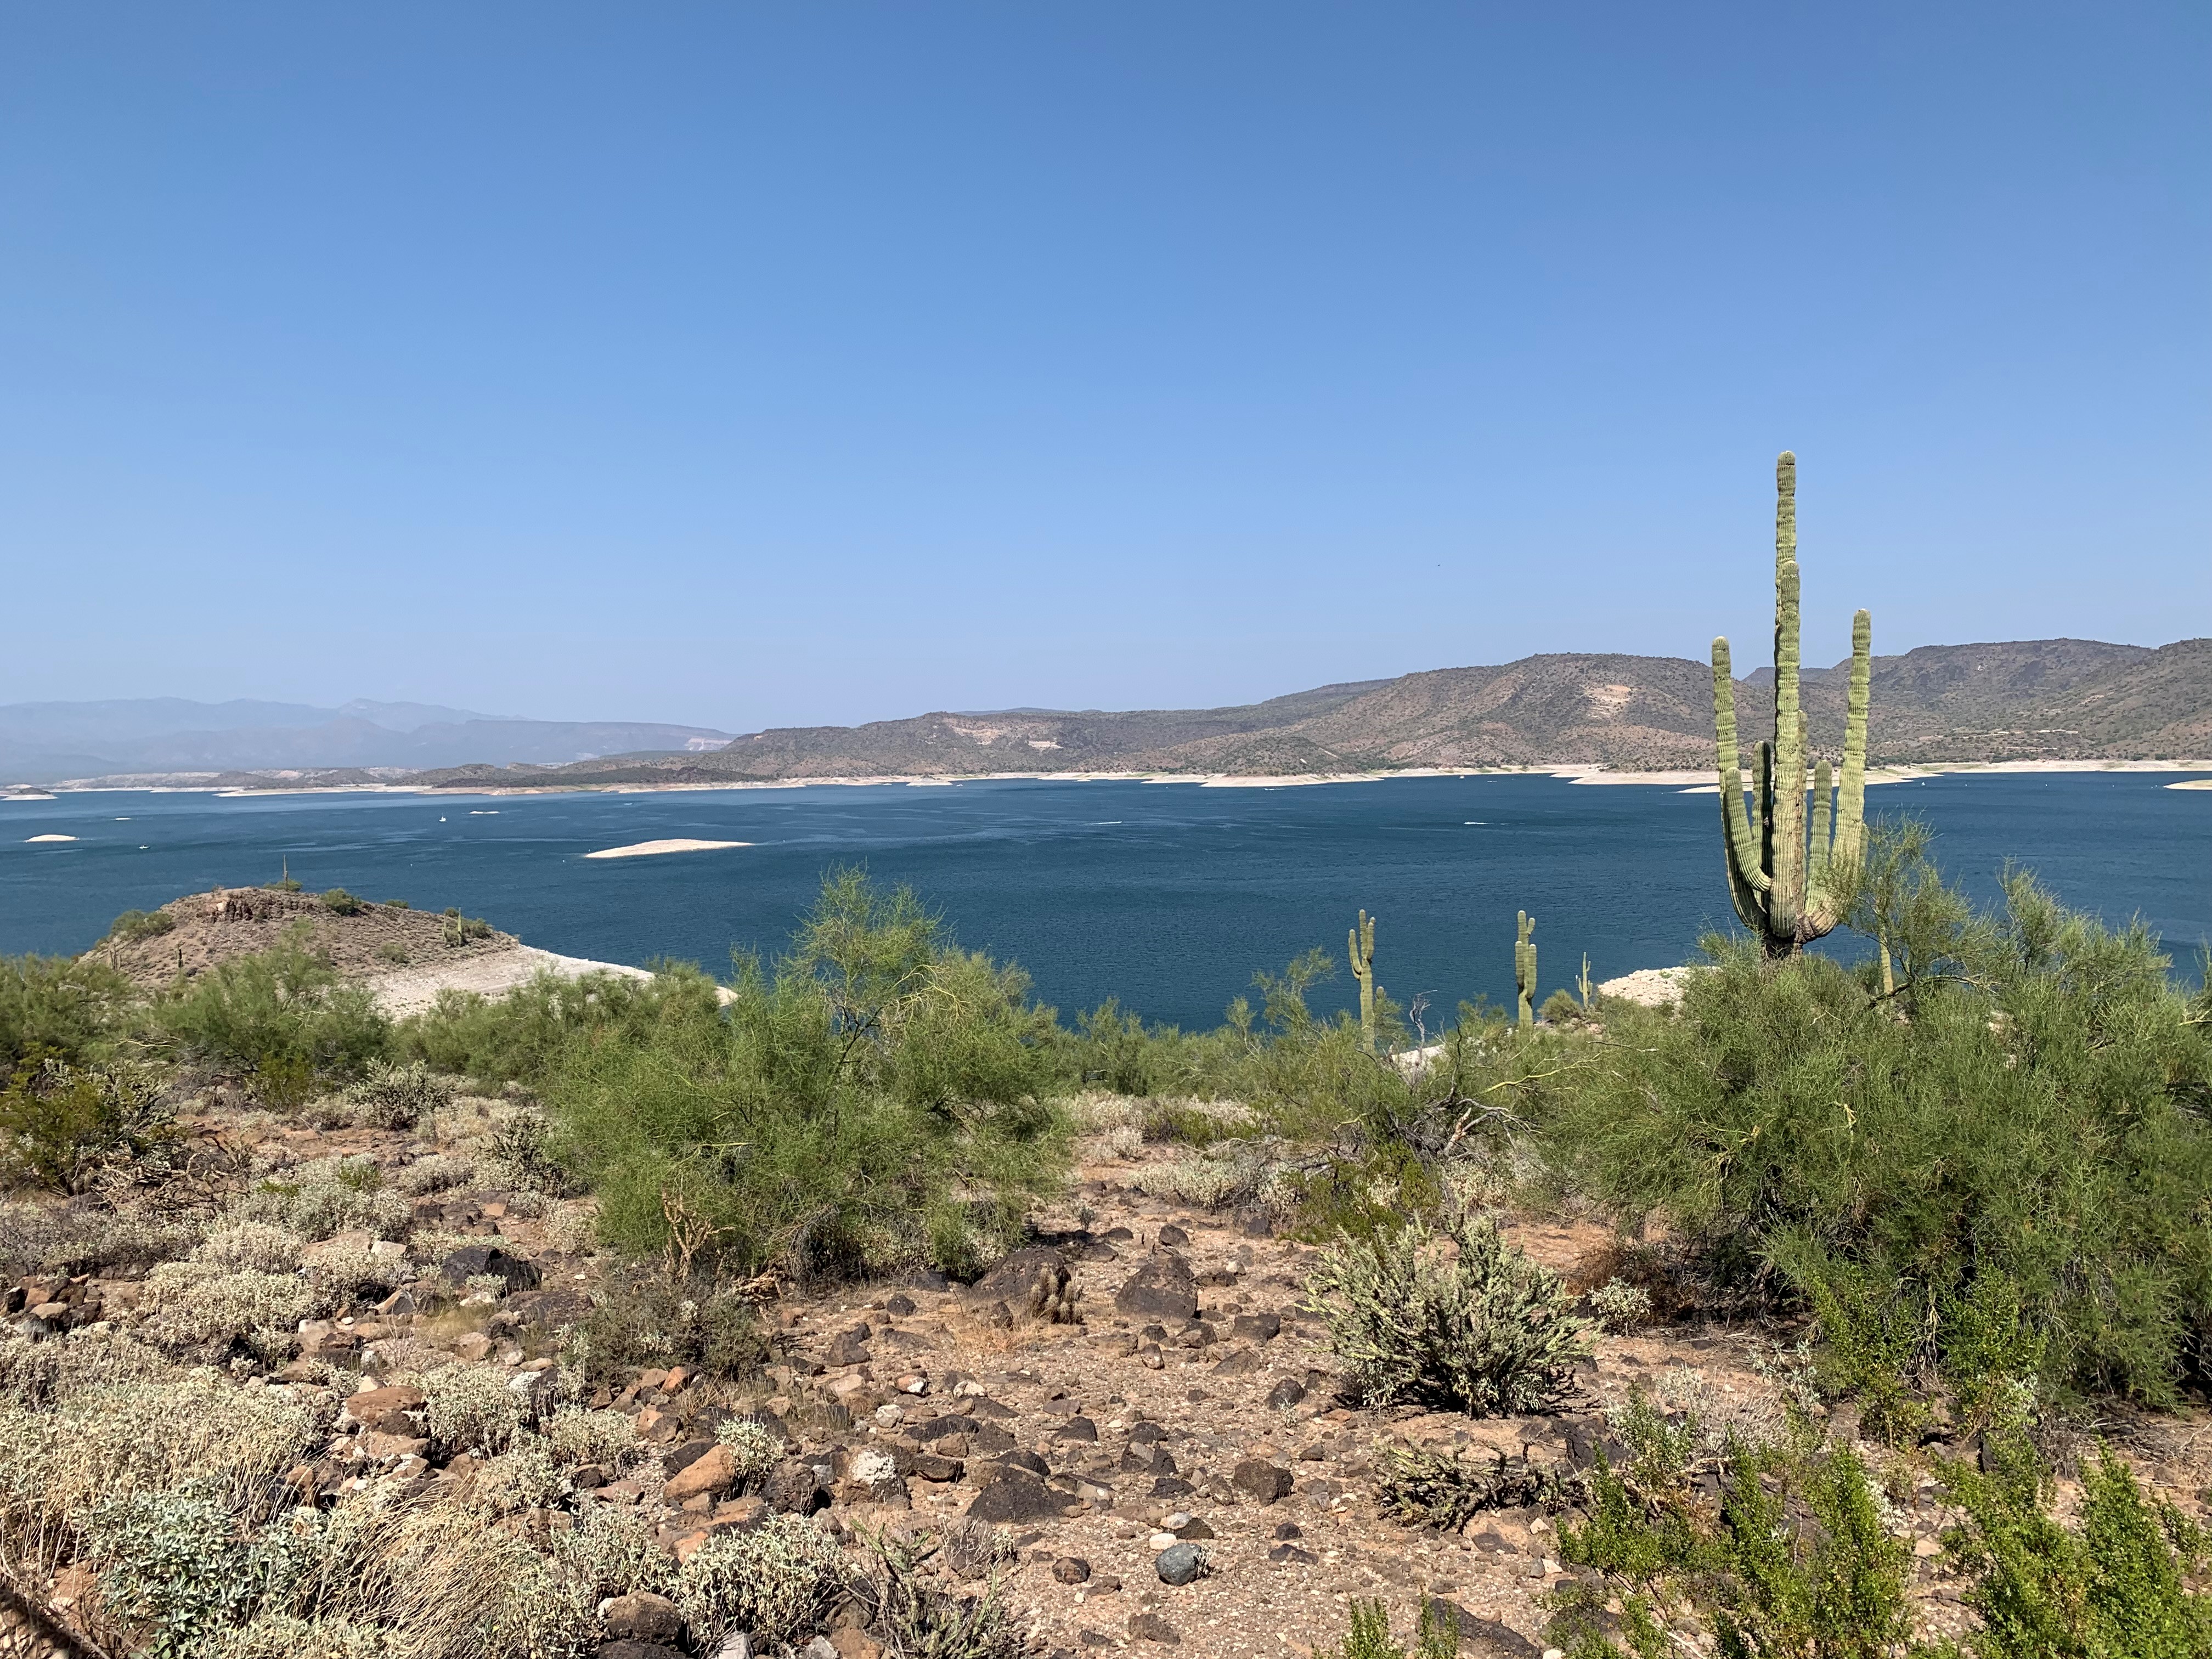 Saguaro Cactus with Lake Mead in the Background